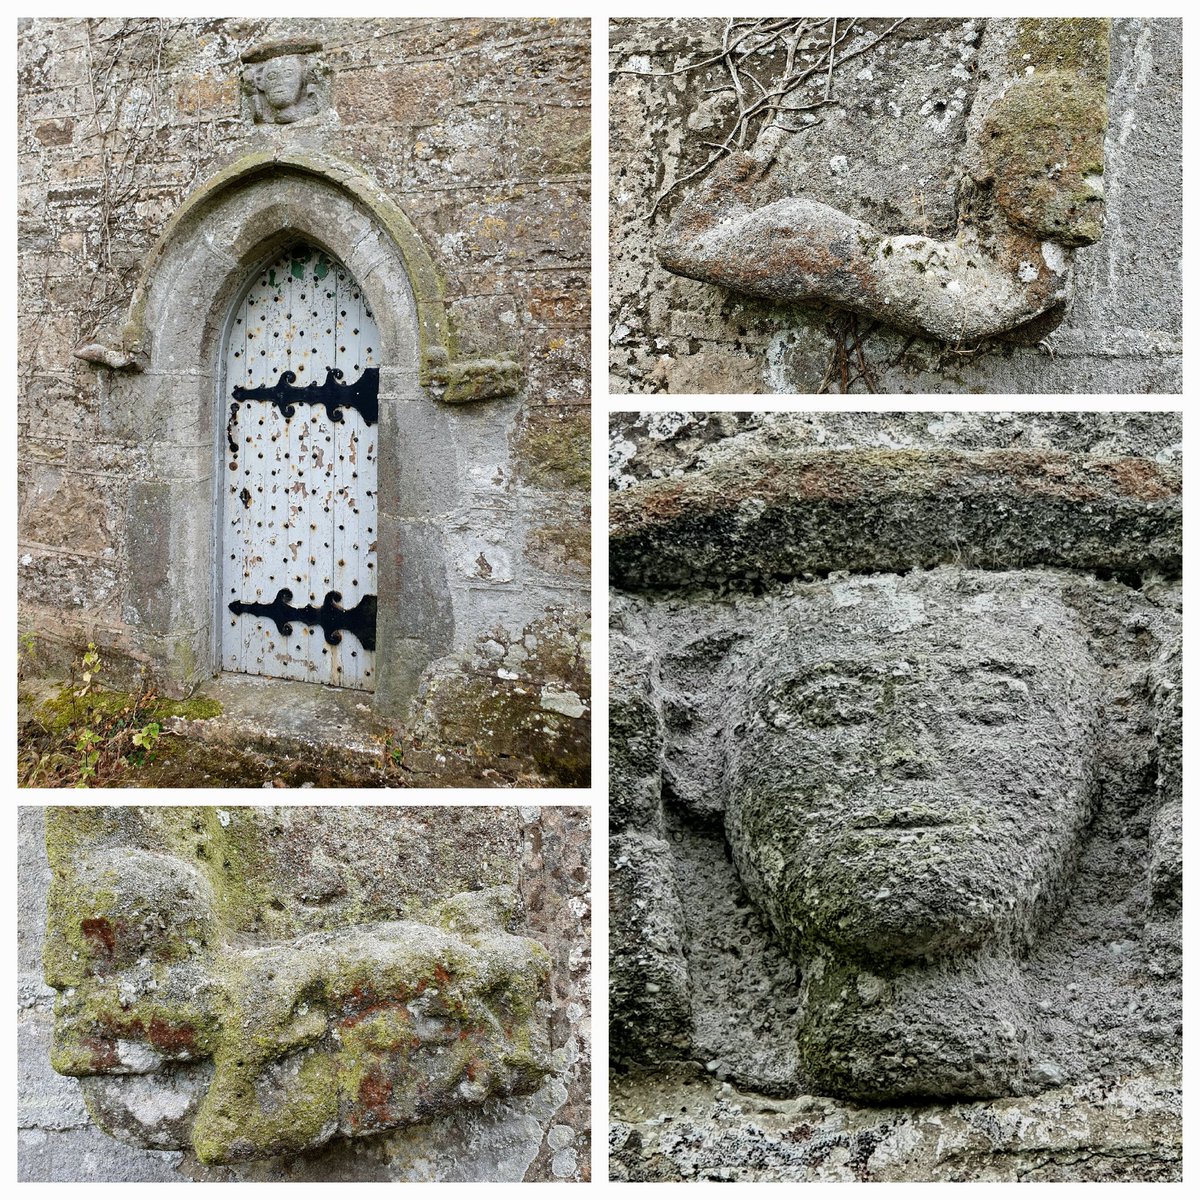 Some #sunbathing and the many faces of Llanddyfnan 14th century church #Anglesey #YnysMôn #AdoorableThursday #heatwave 🌞#Wales #heritage #architecture